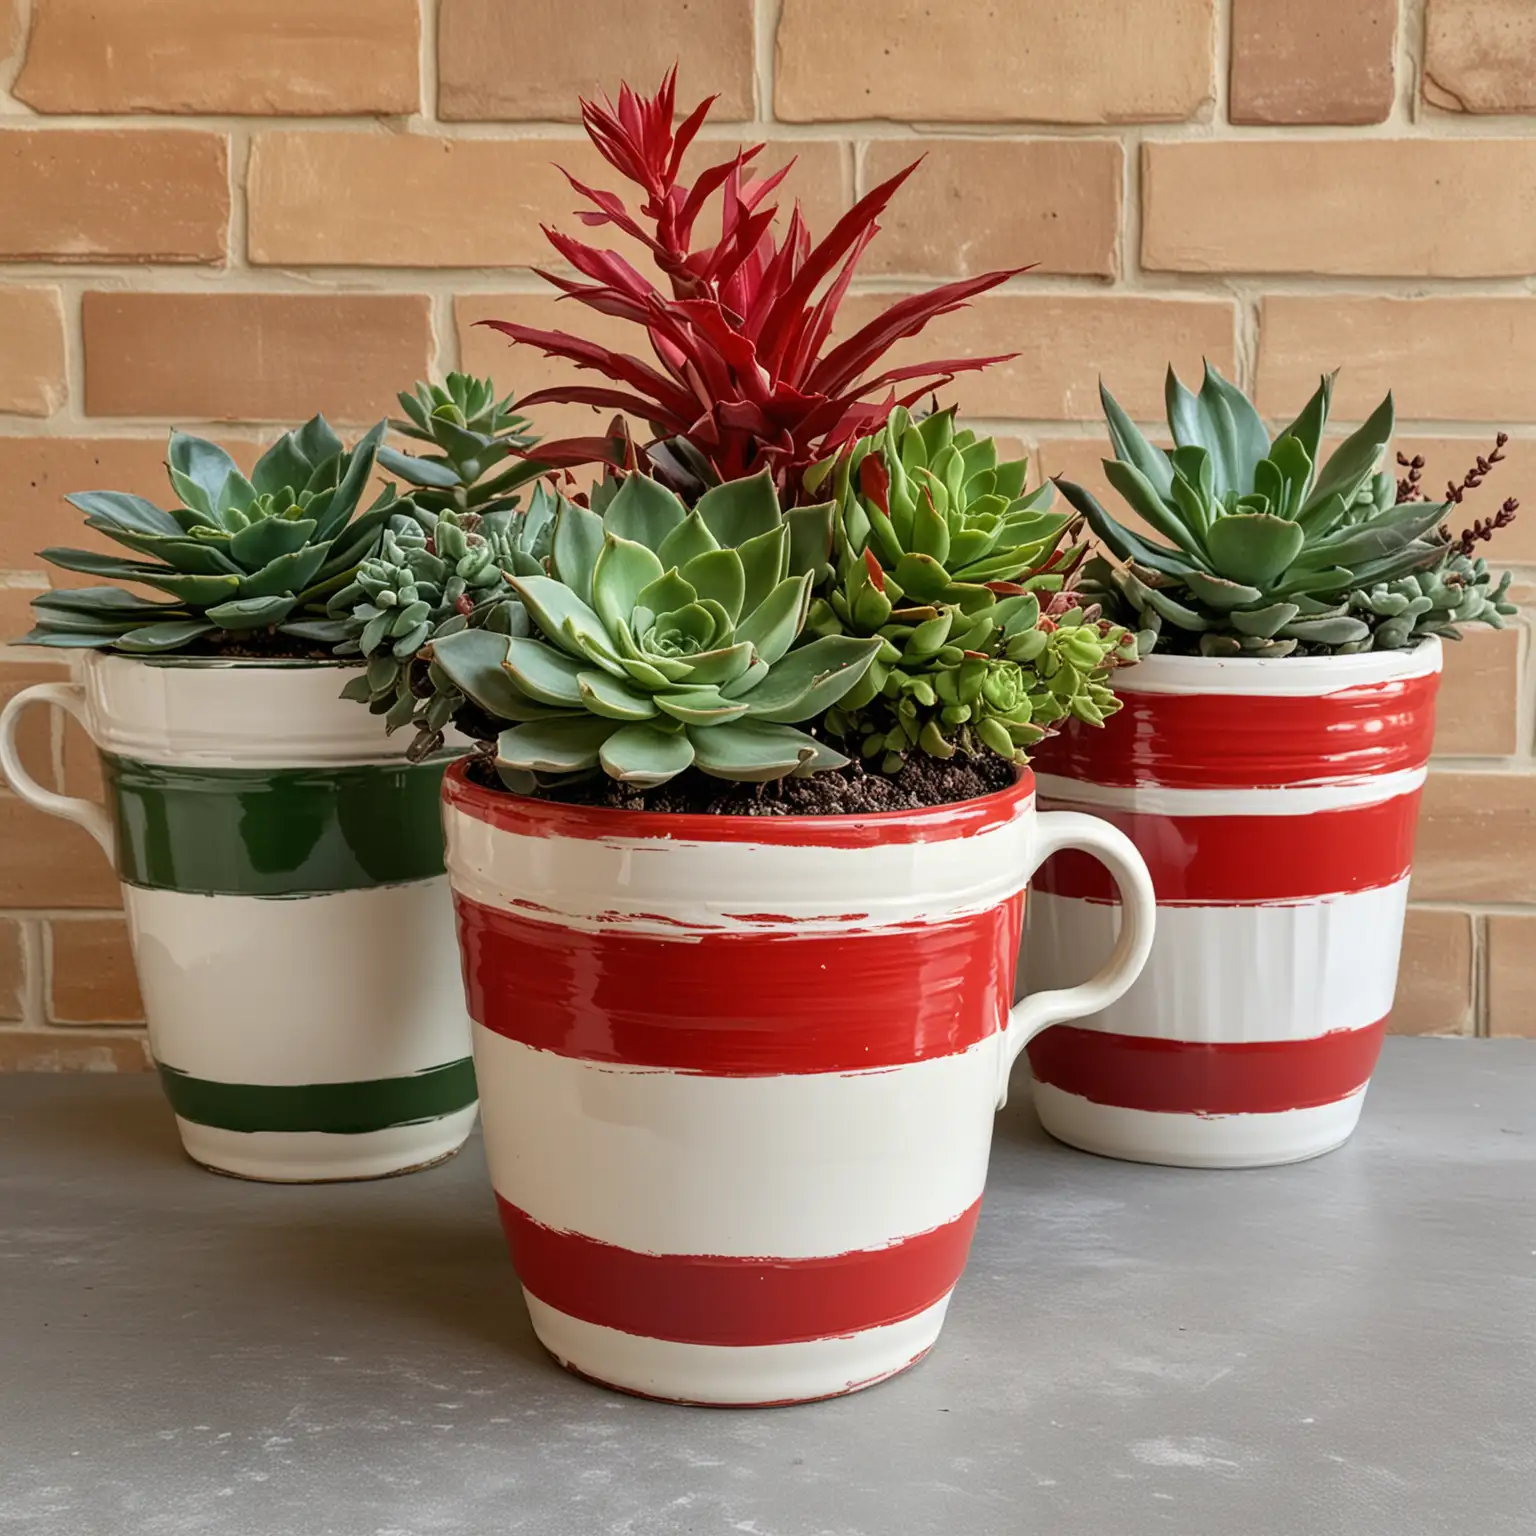 very large traditional looking coffee cup shapes used as a vase, painted in solid red, white and green colors, and each has a succulent plant for a simple centerpiece